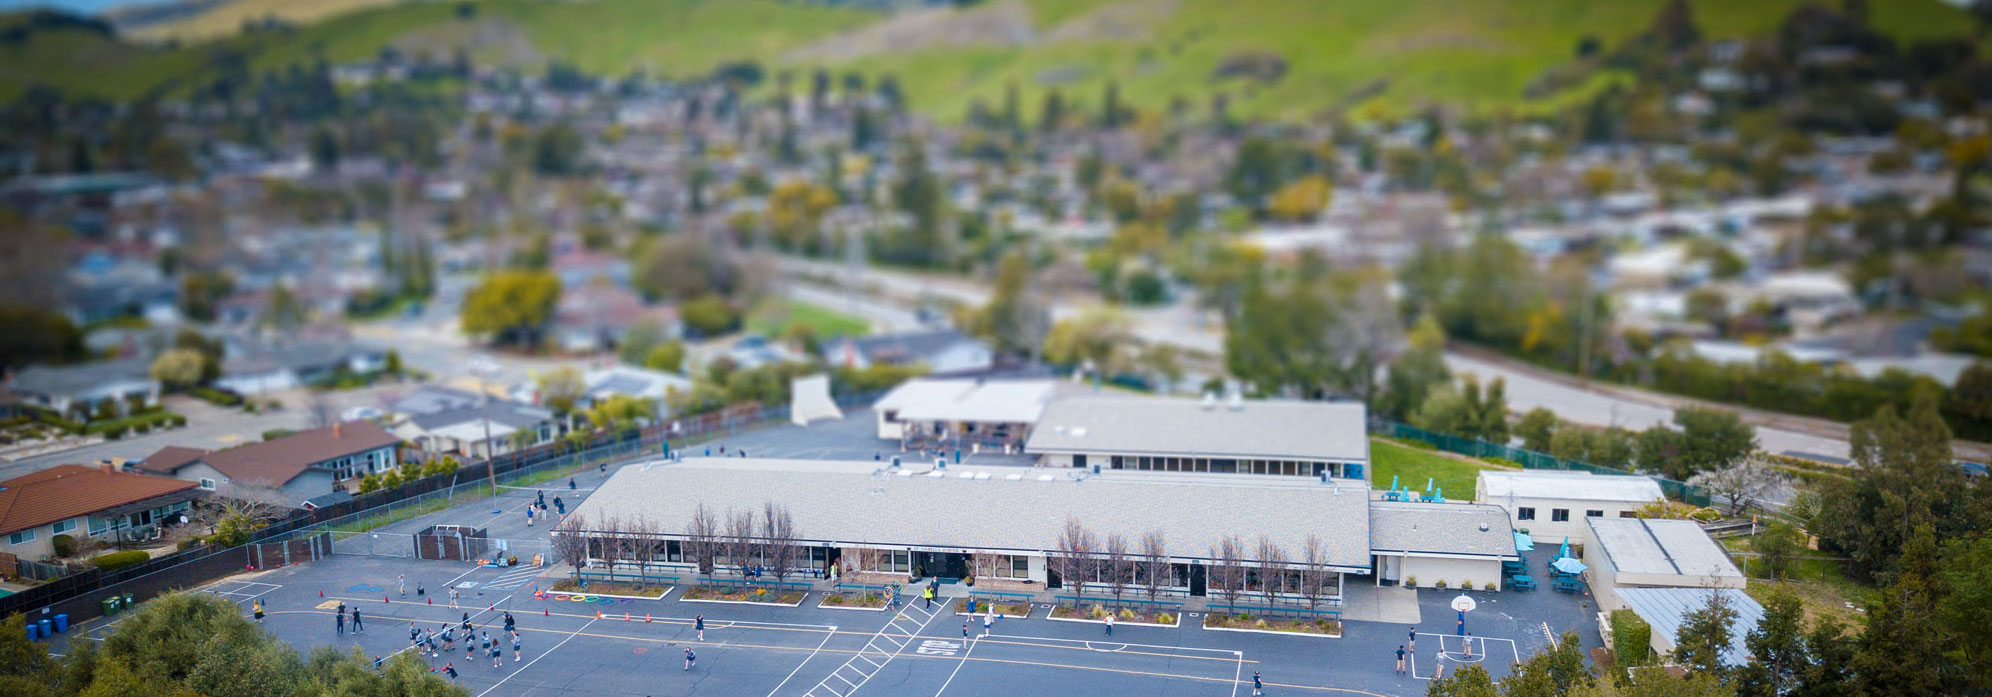 Saint Isabella School from the air